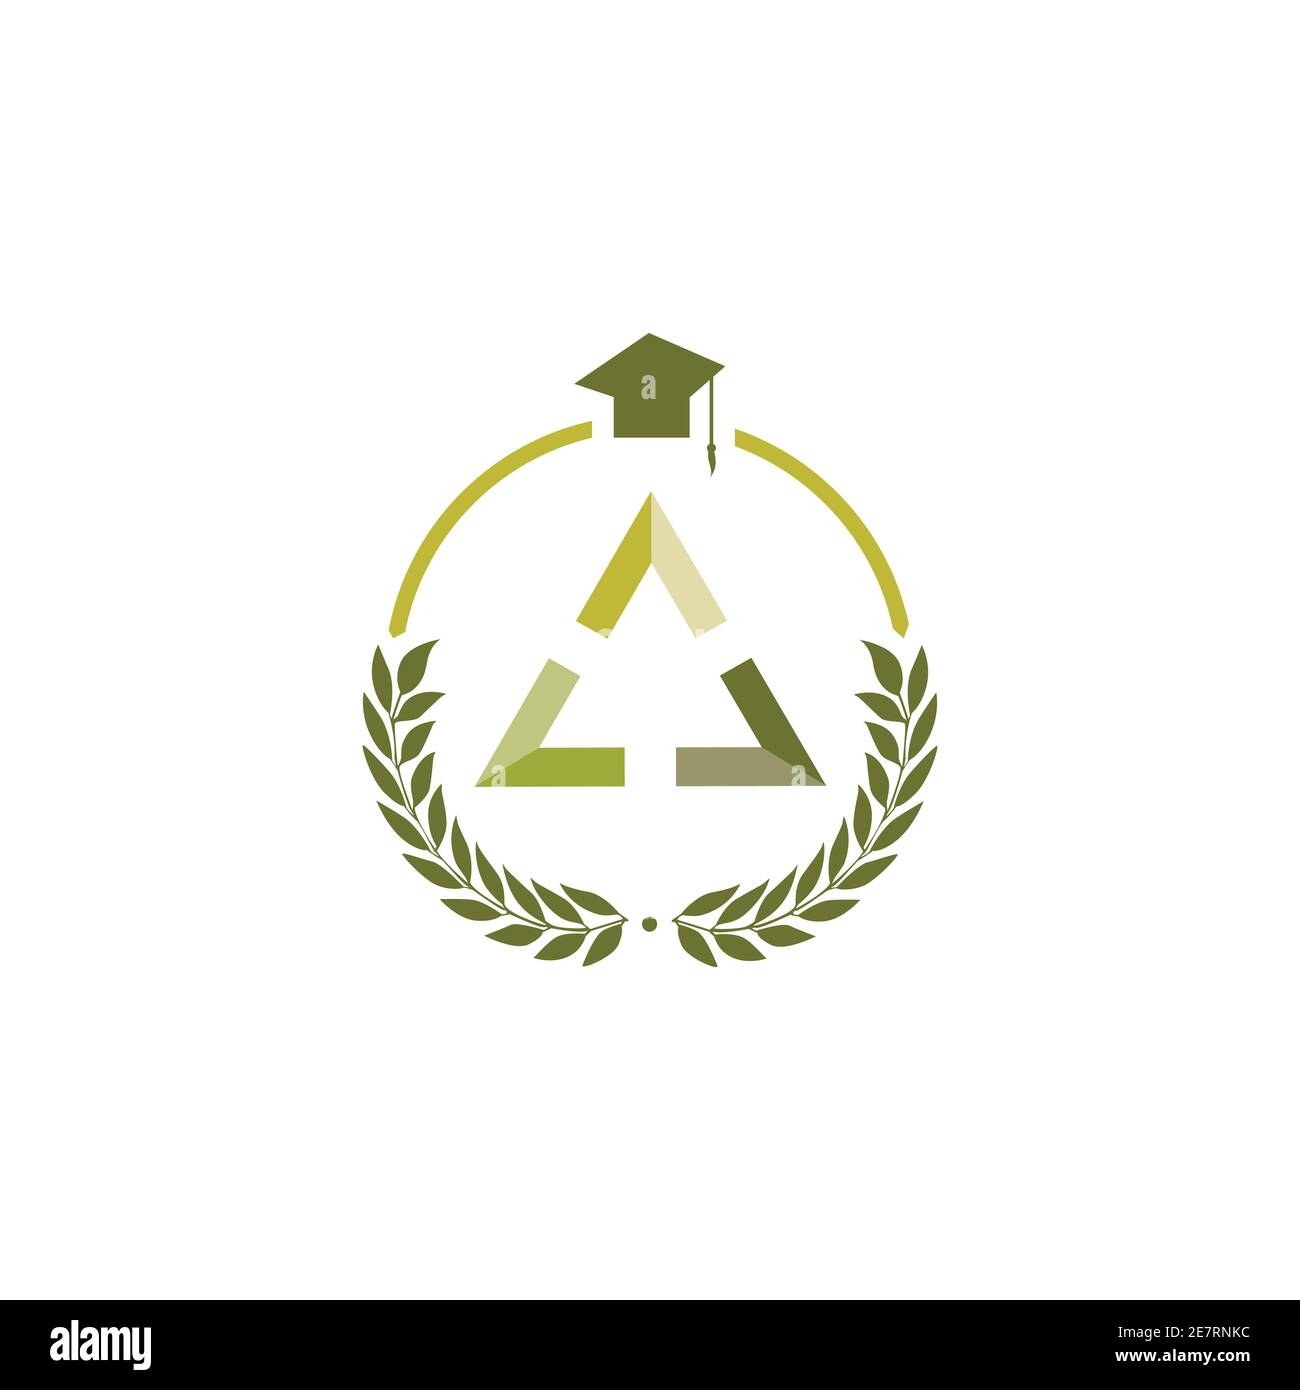 Abstract triangle symbol education logo emblem design template. Abstract education logo for school or university design template Stock Vector